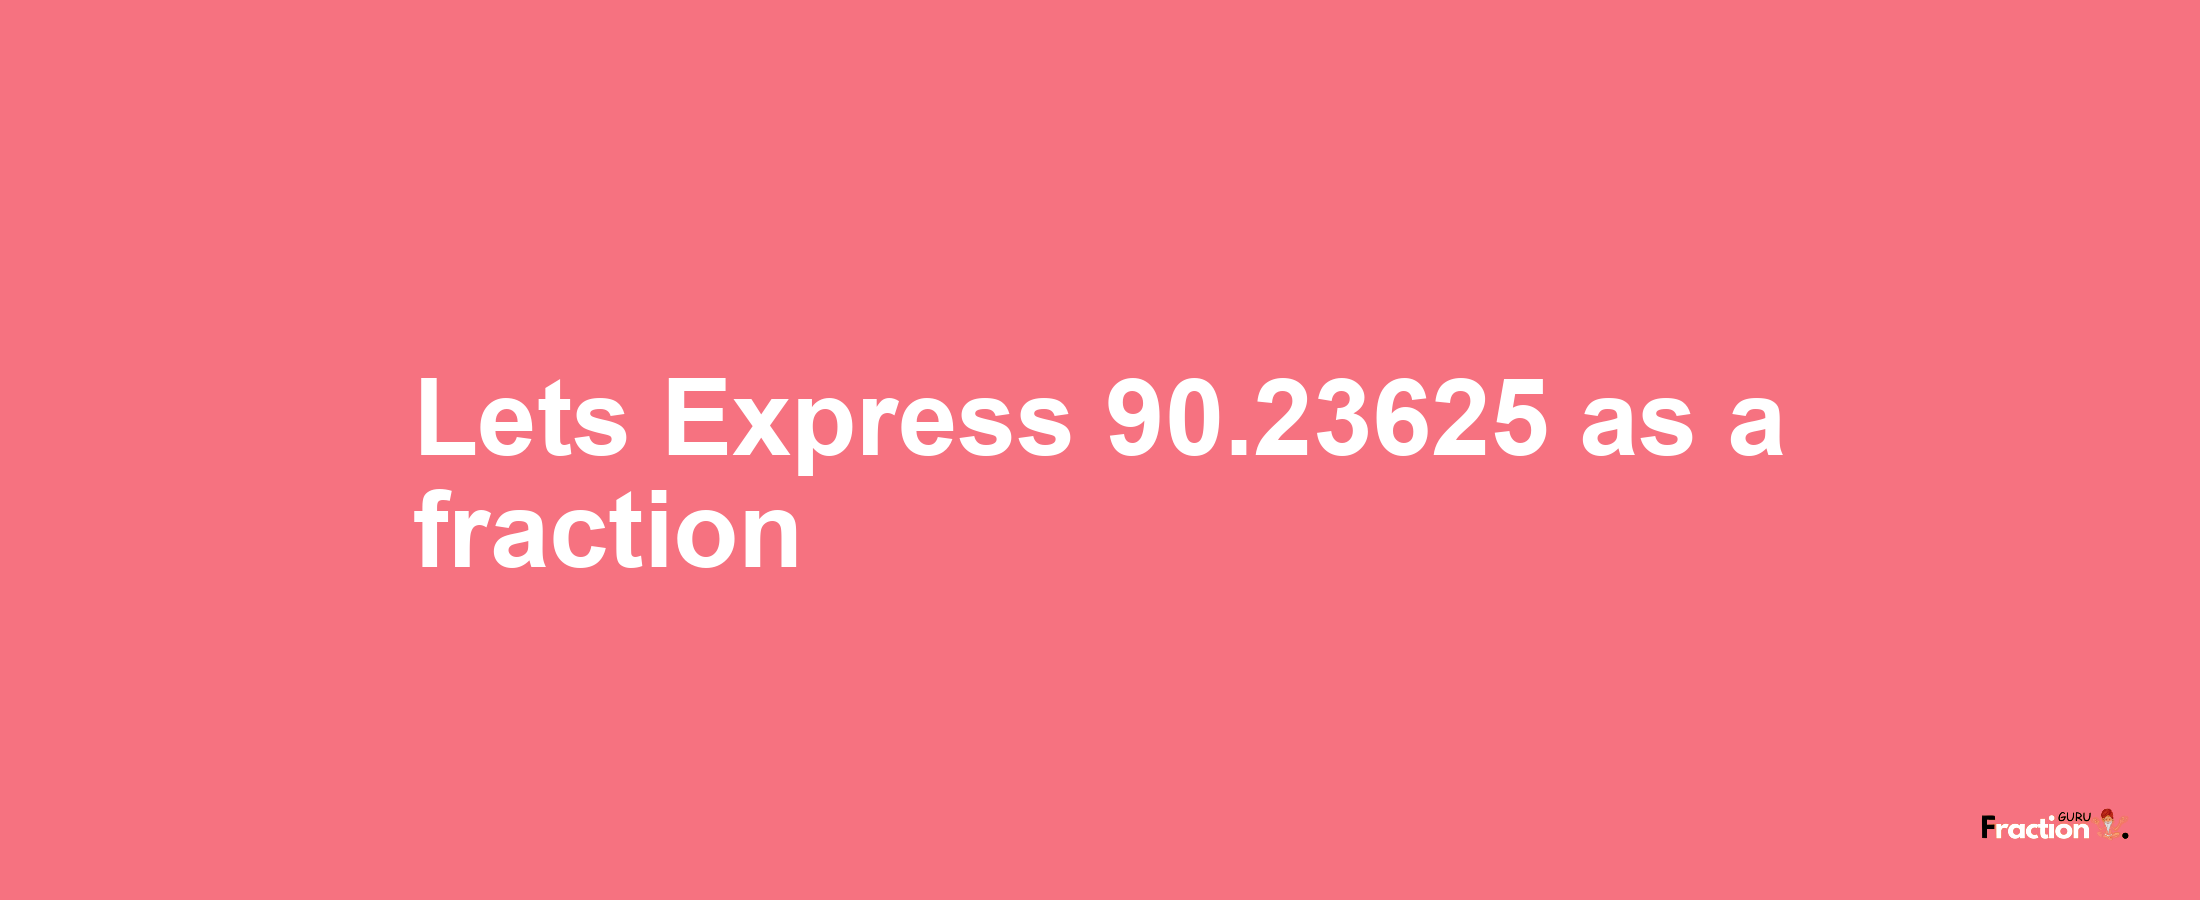 Lets Express 90.23625 as afraction